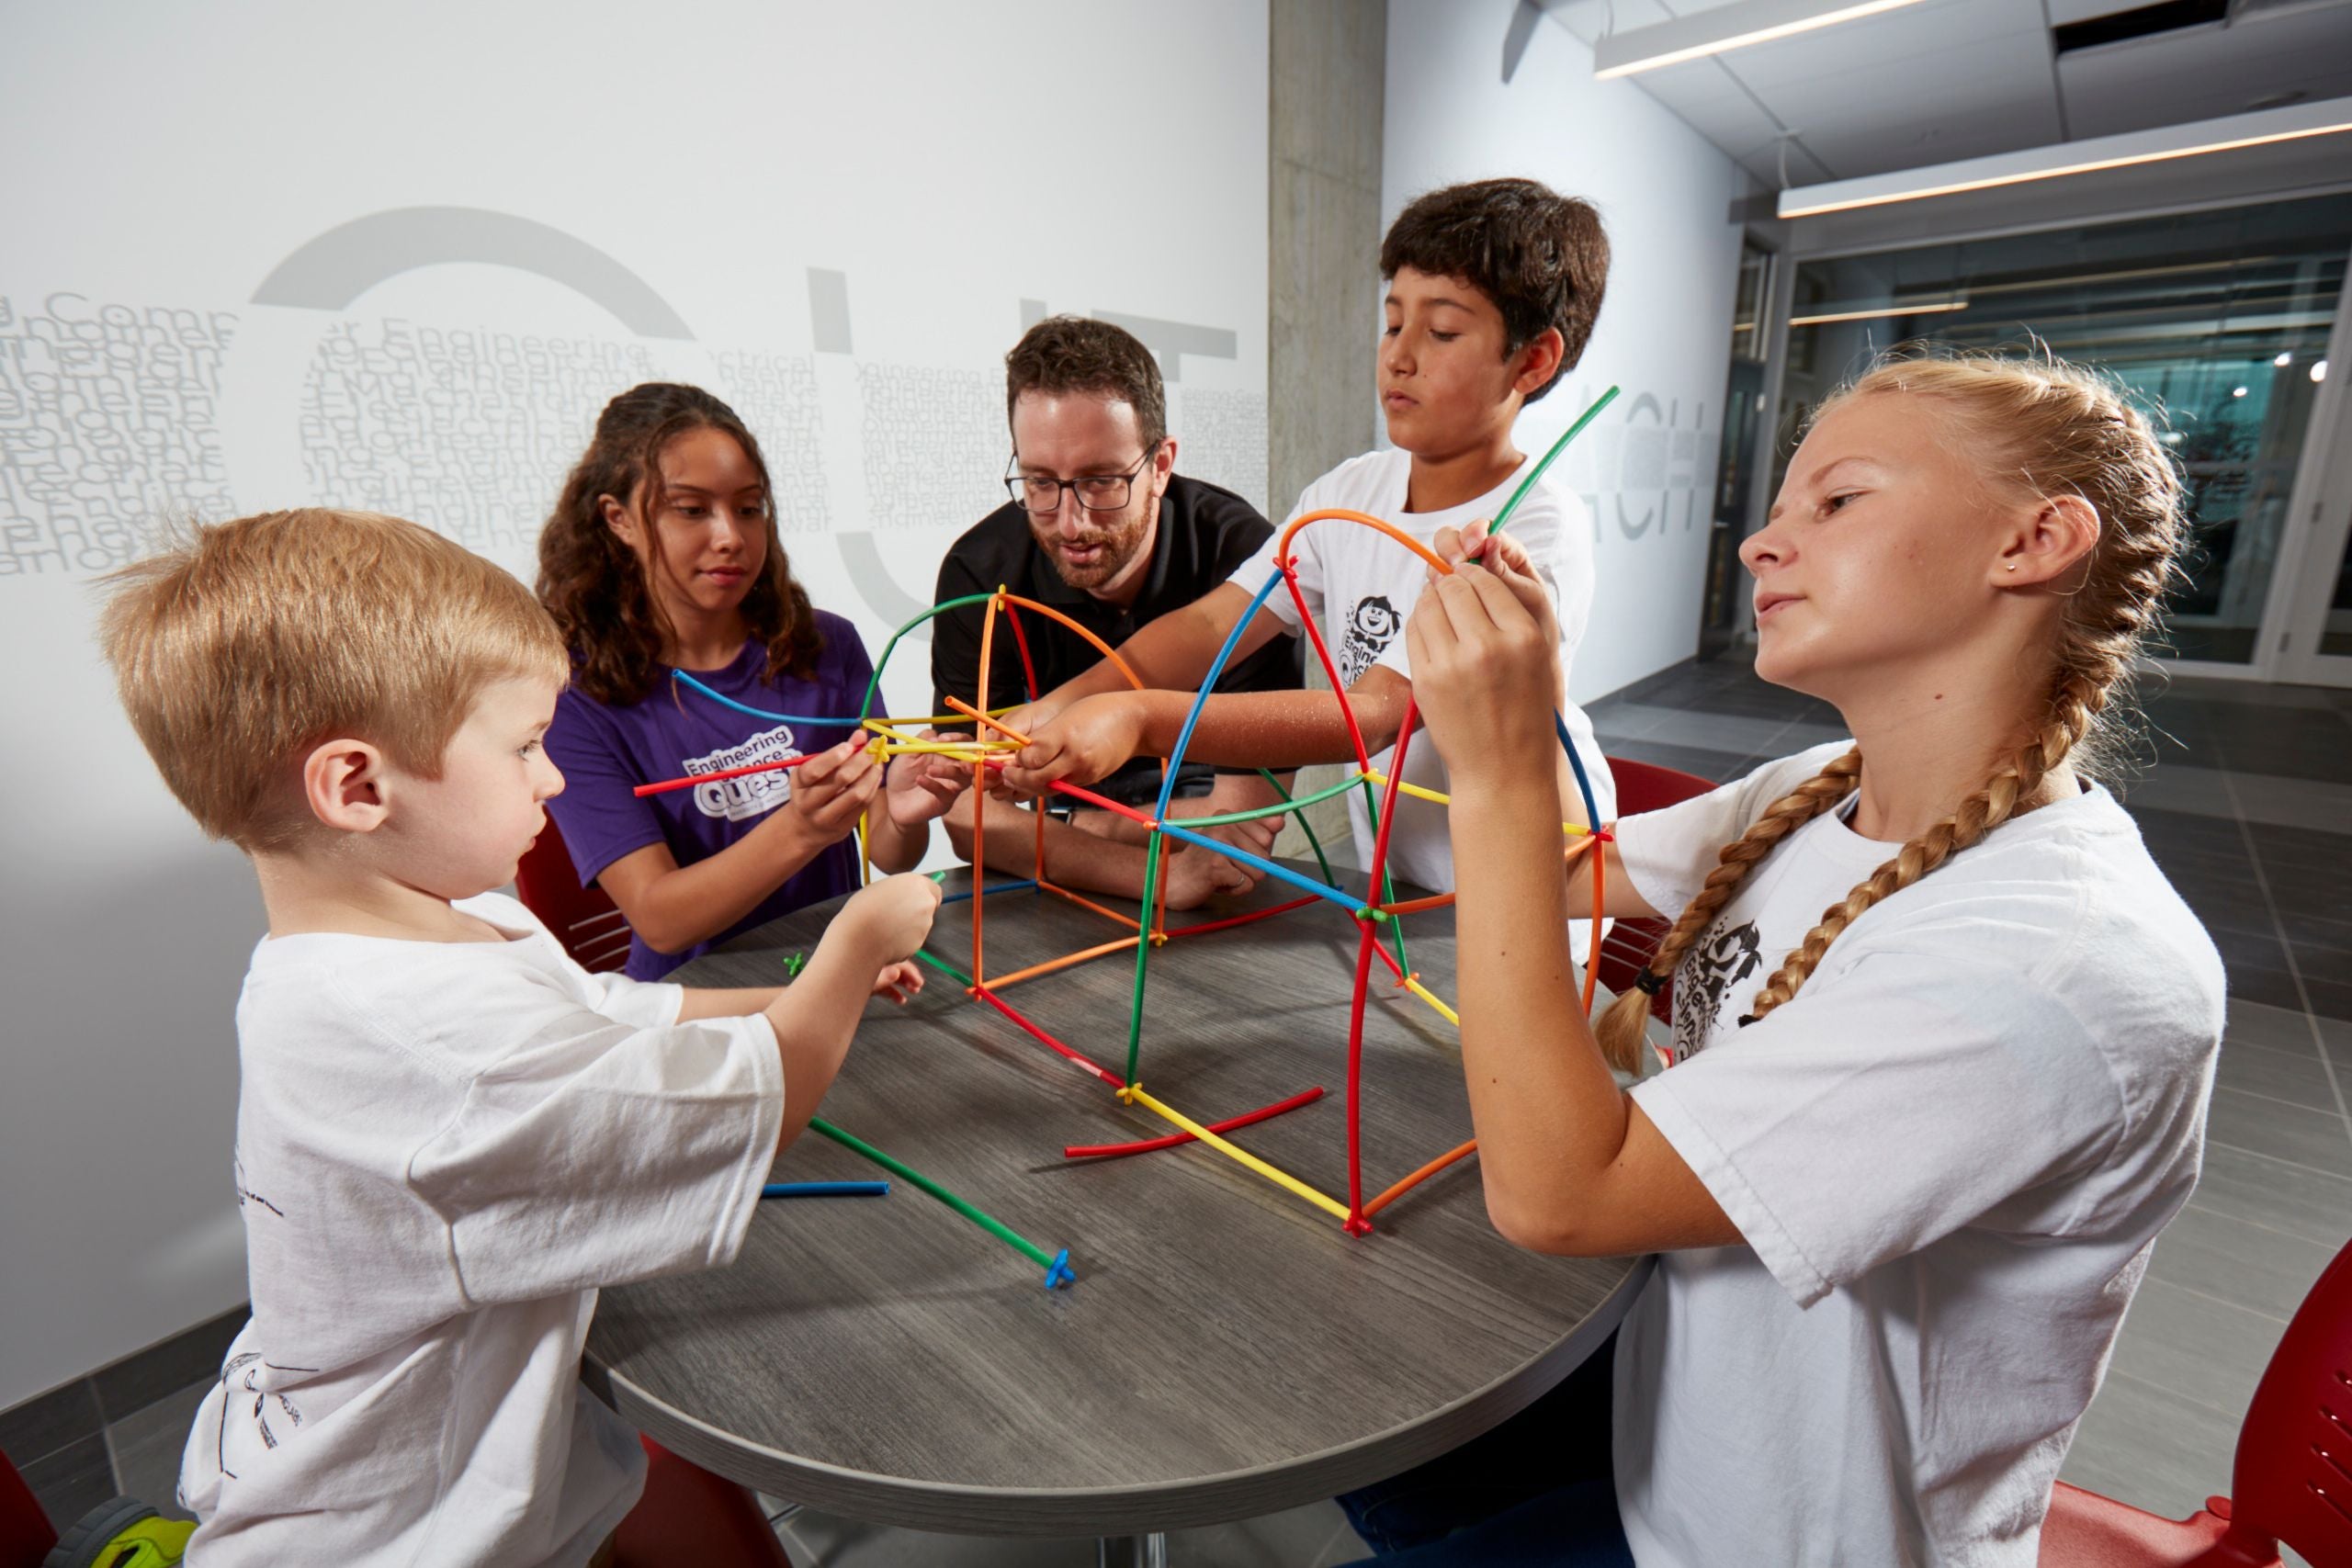 Three children and two volunteers building structures at a table